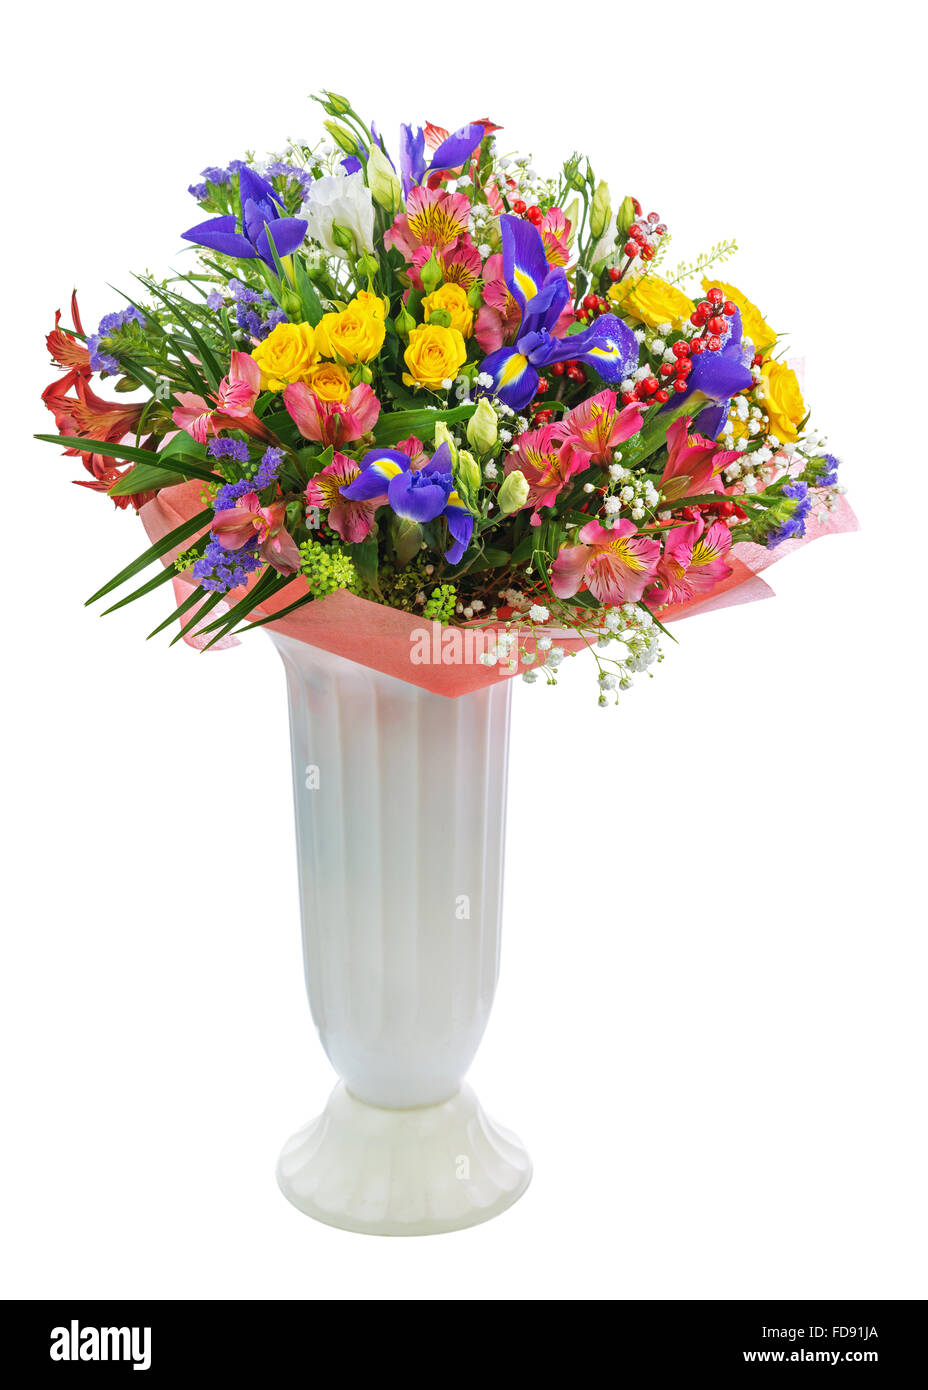 Delicate beautiful bouquet of roses, iris, alstroemeria, nerine and other flowers with colored packaging in vase solated on whit Stock Photo